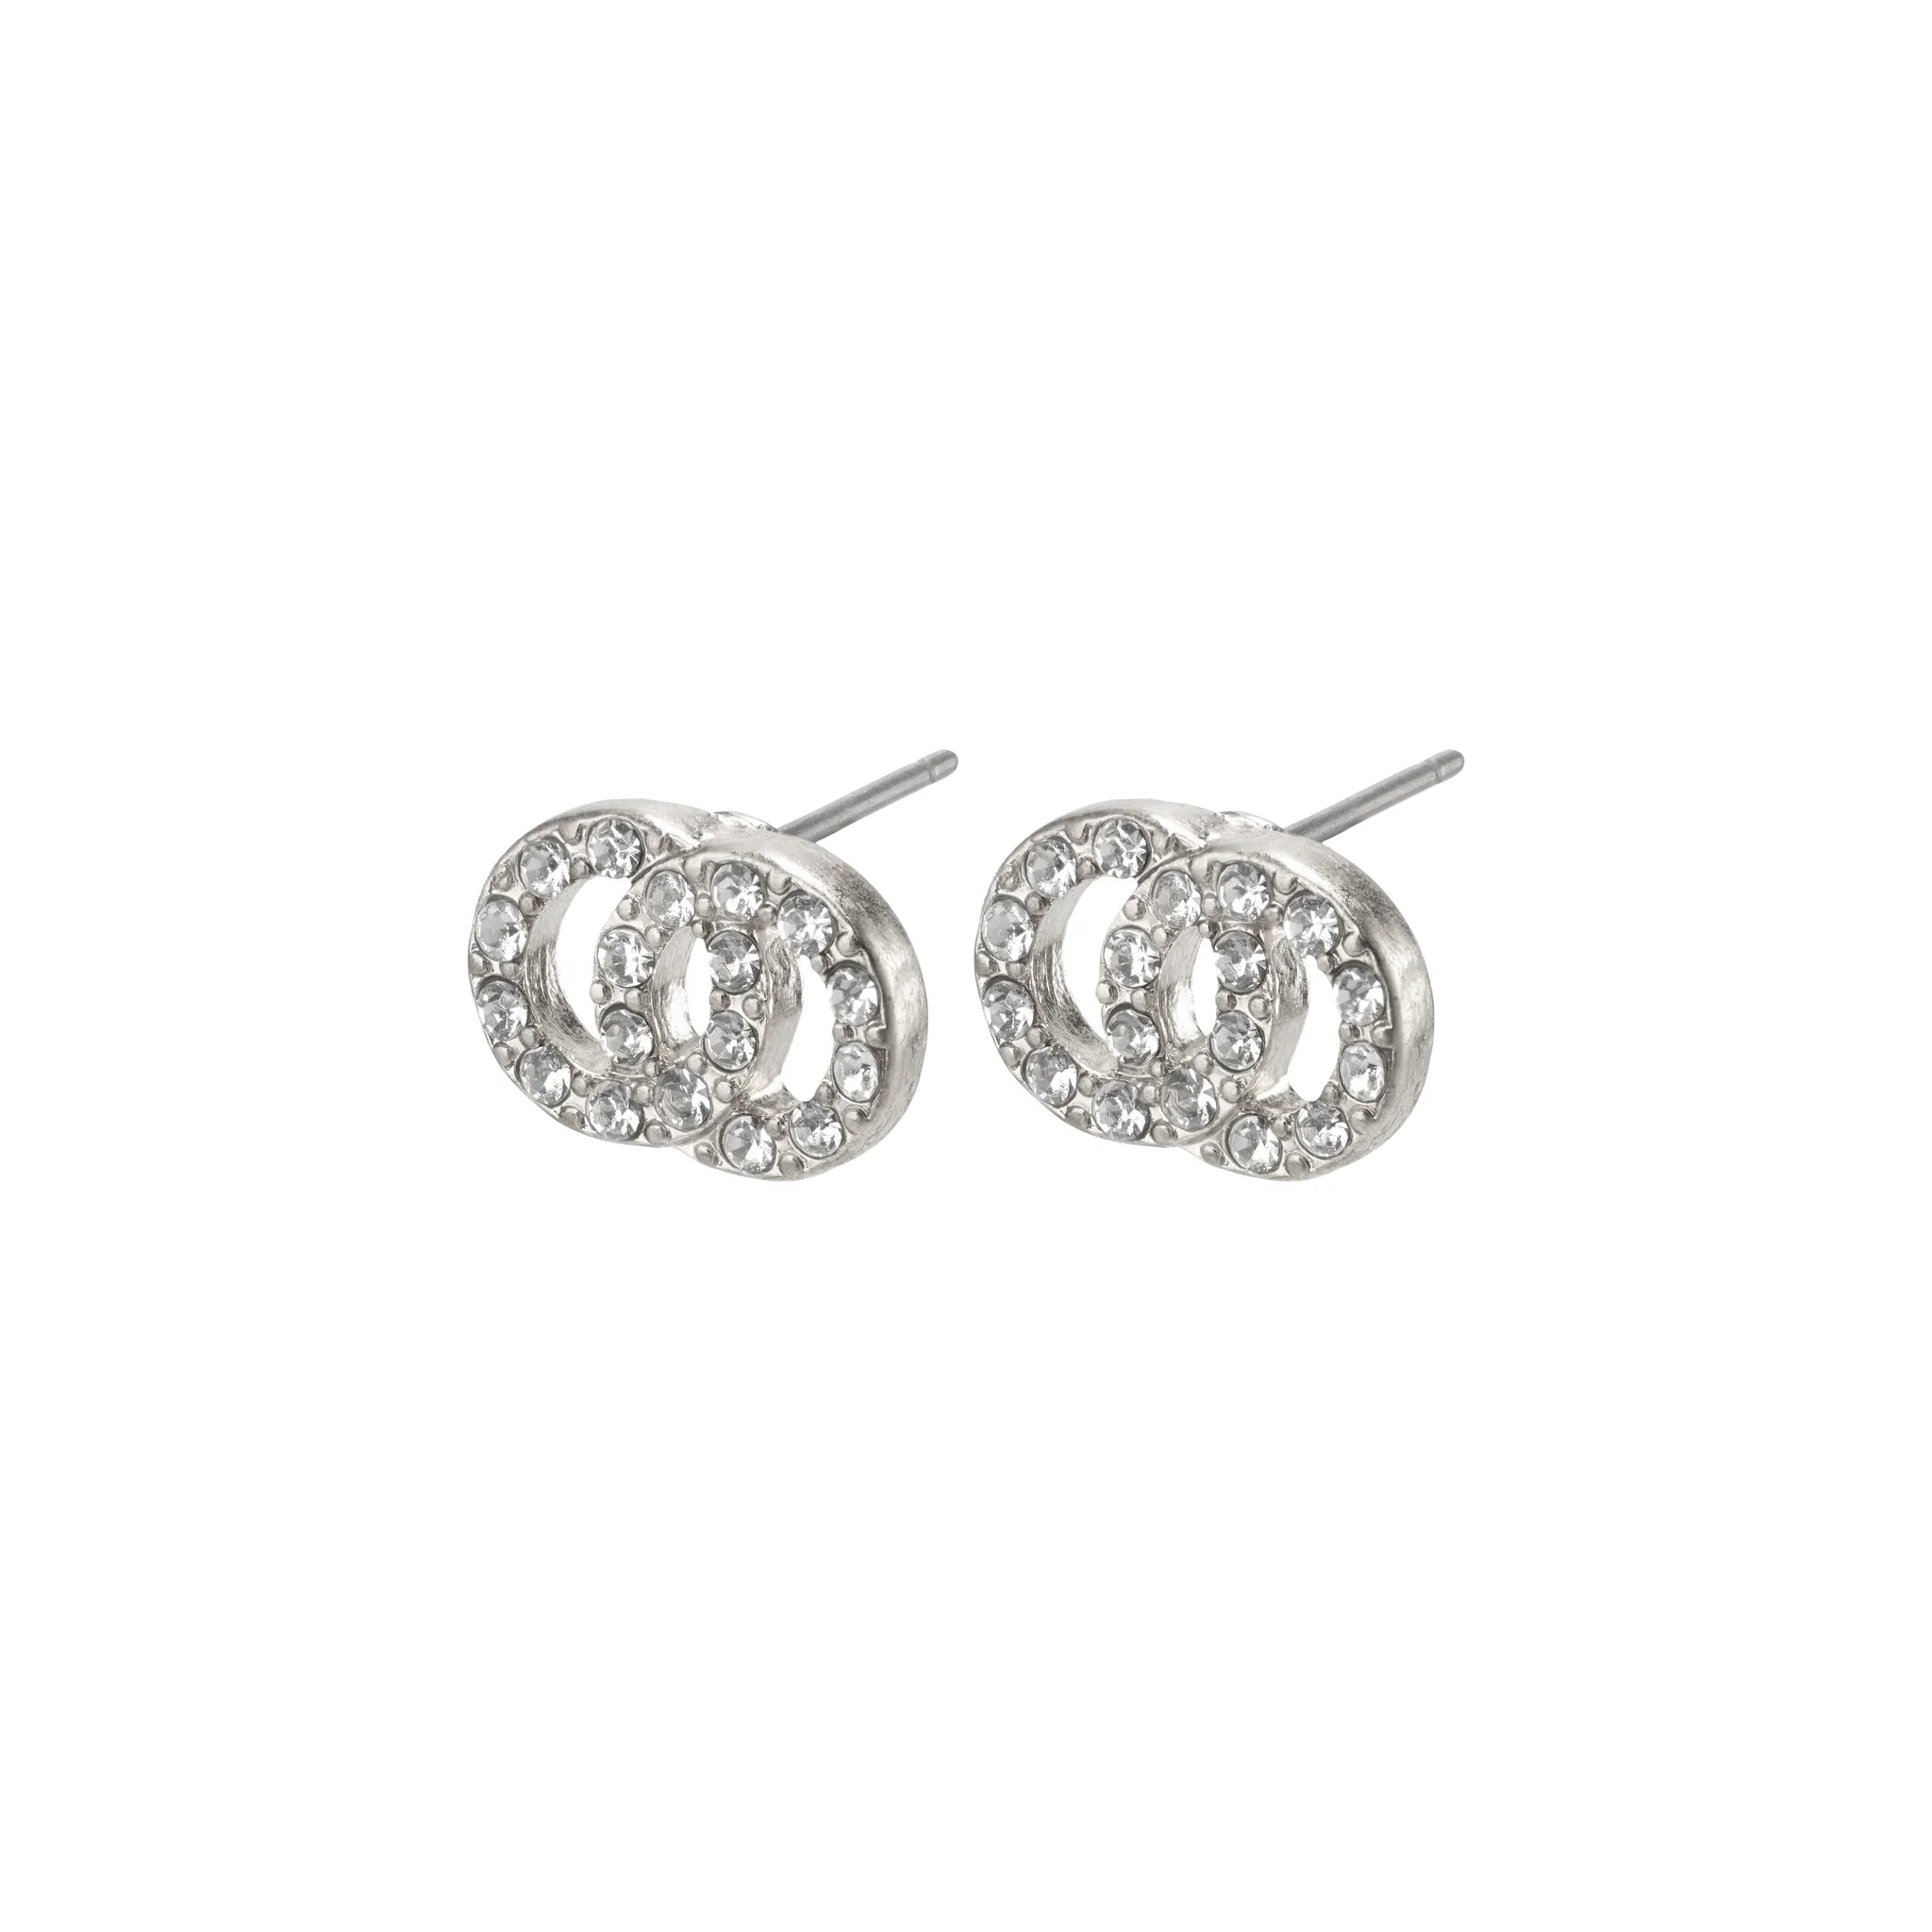 Victoria Crystal Earrings Silver Plated